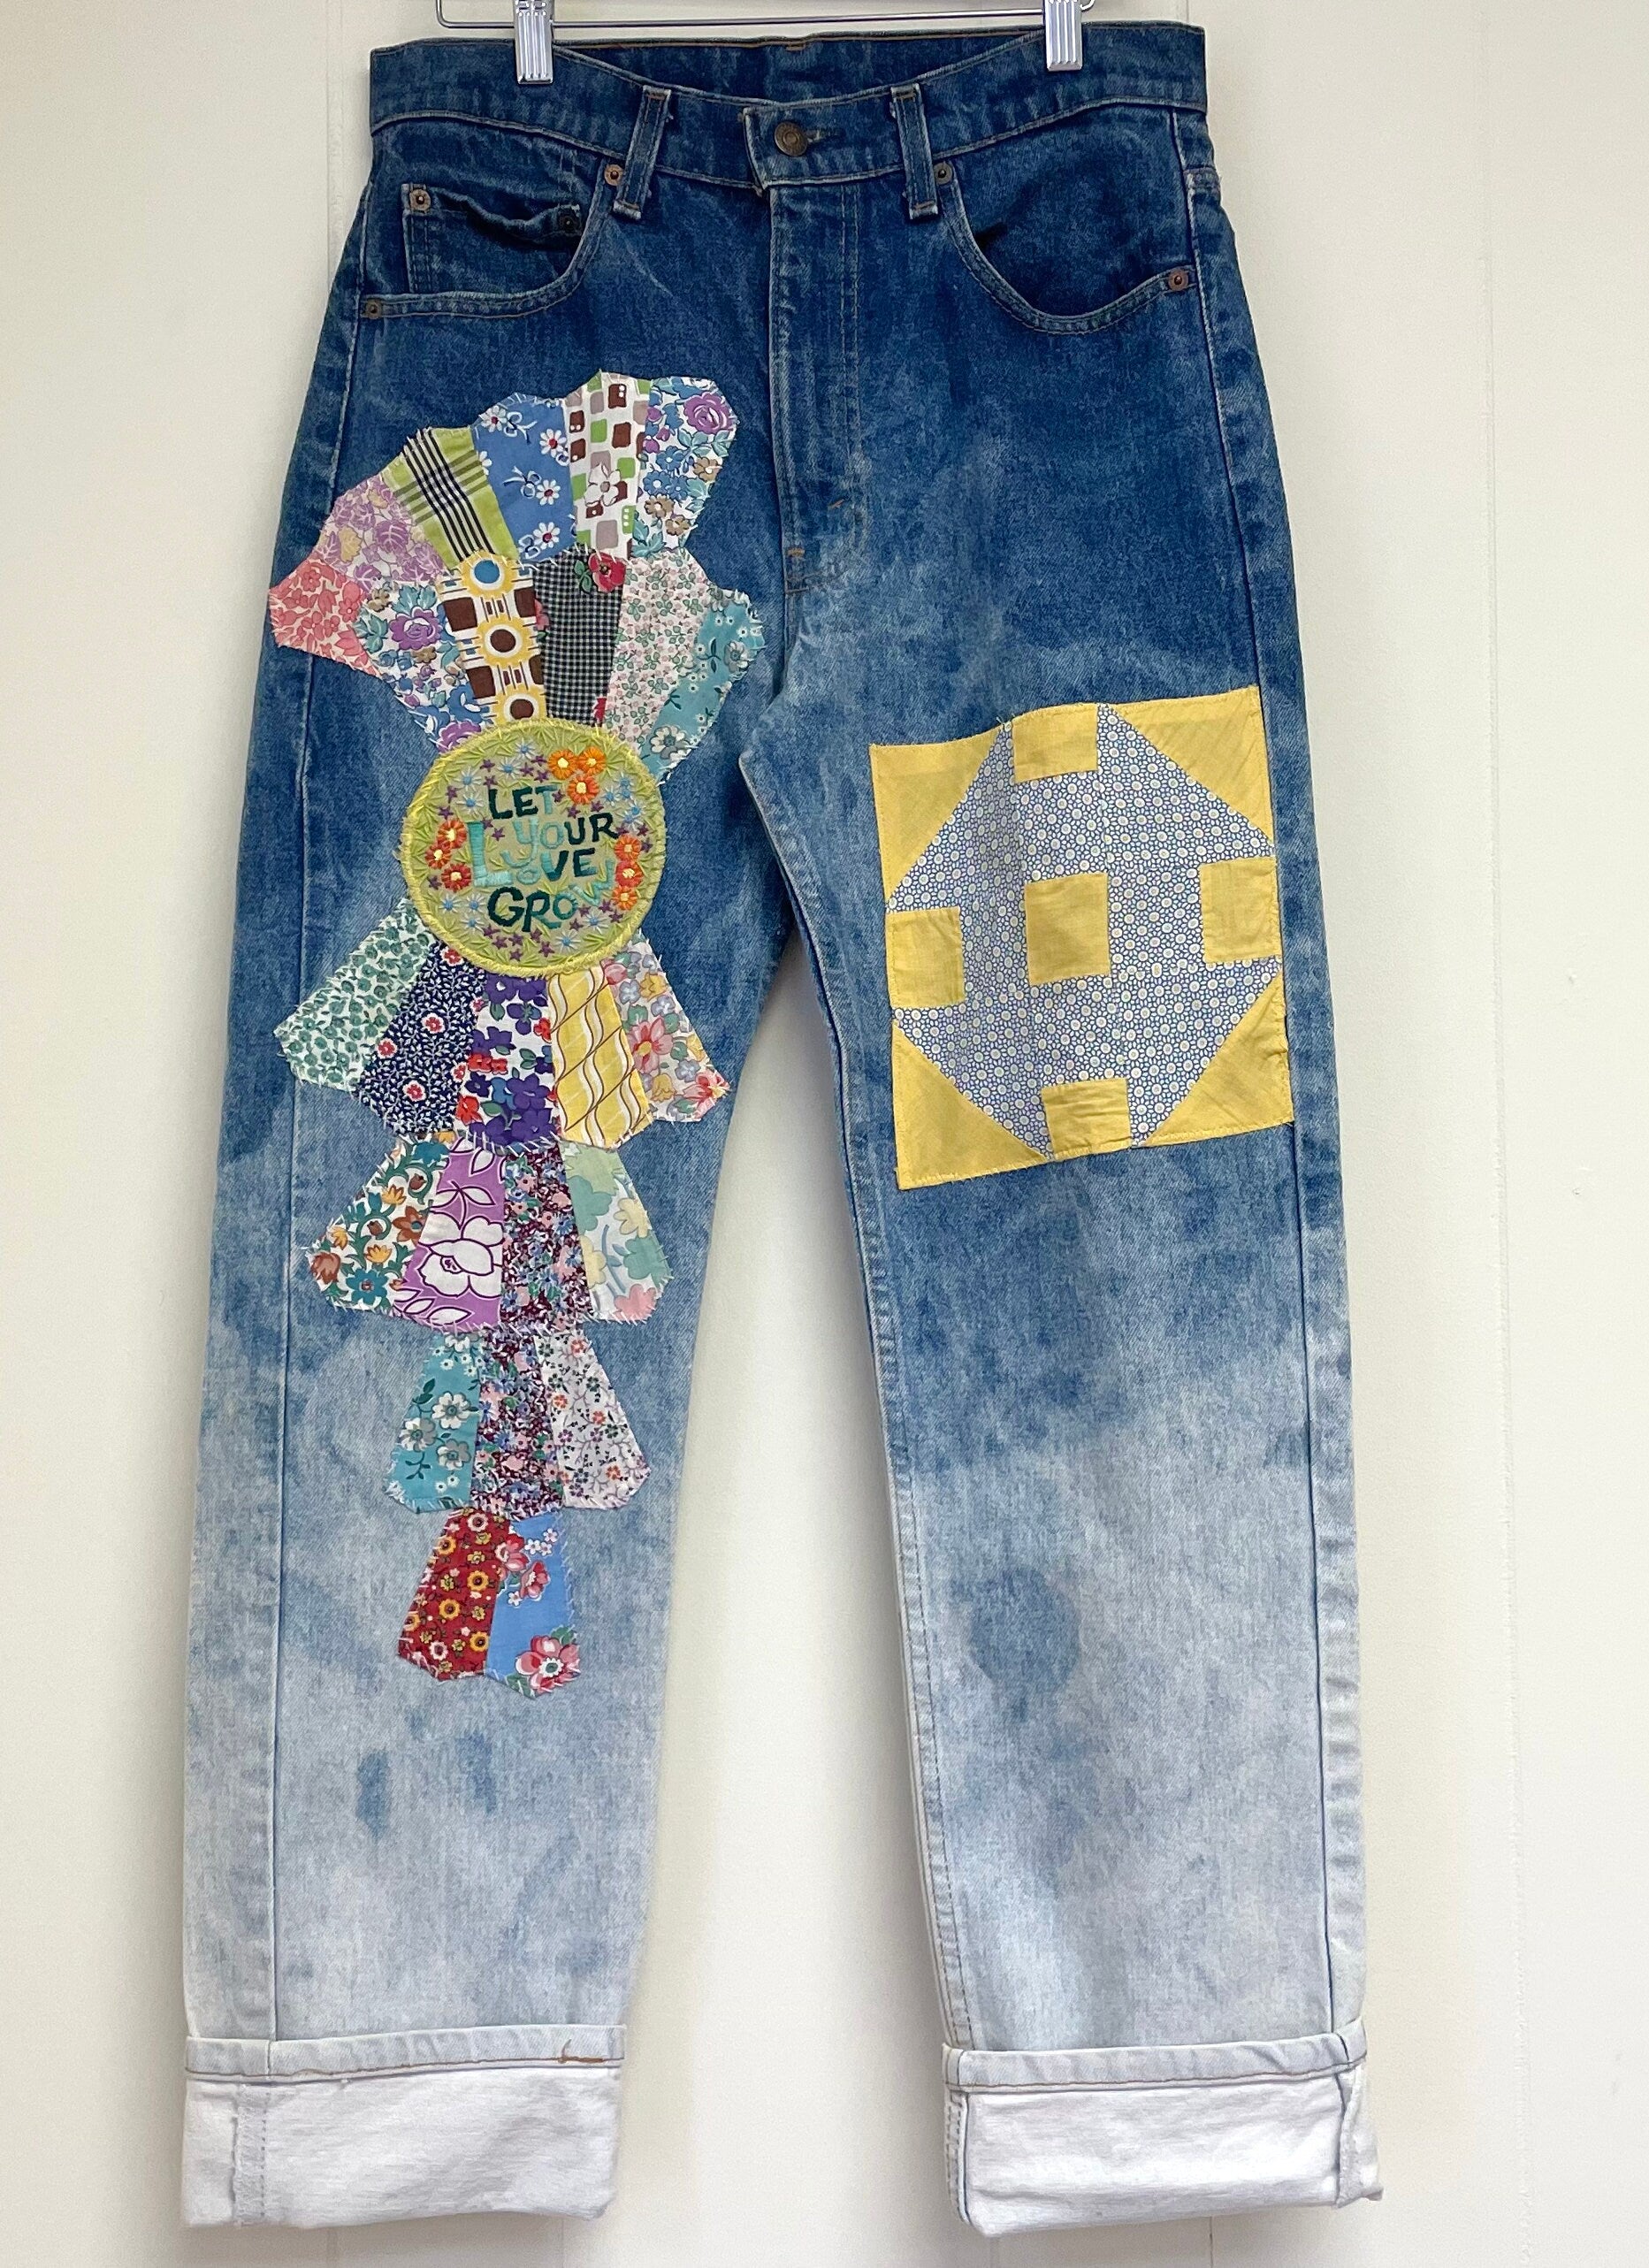 Hippie Hand-Patched Jeans - Let Your Love Grow - Hippie Style